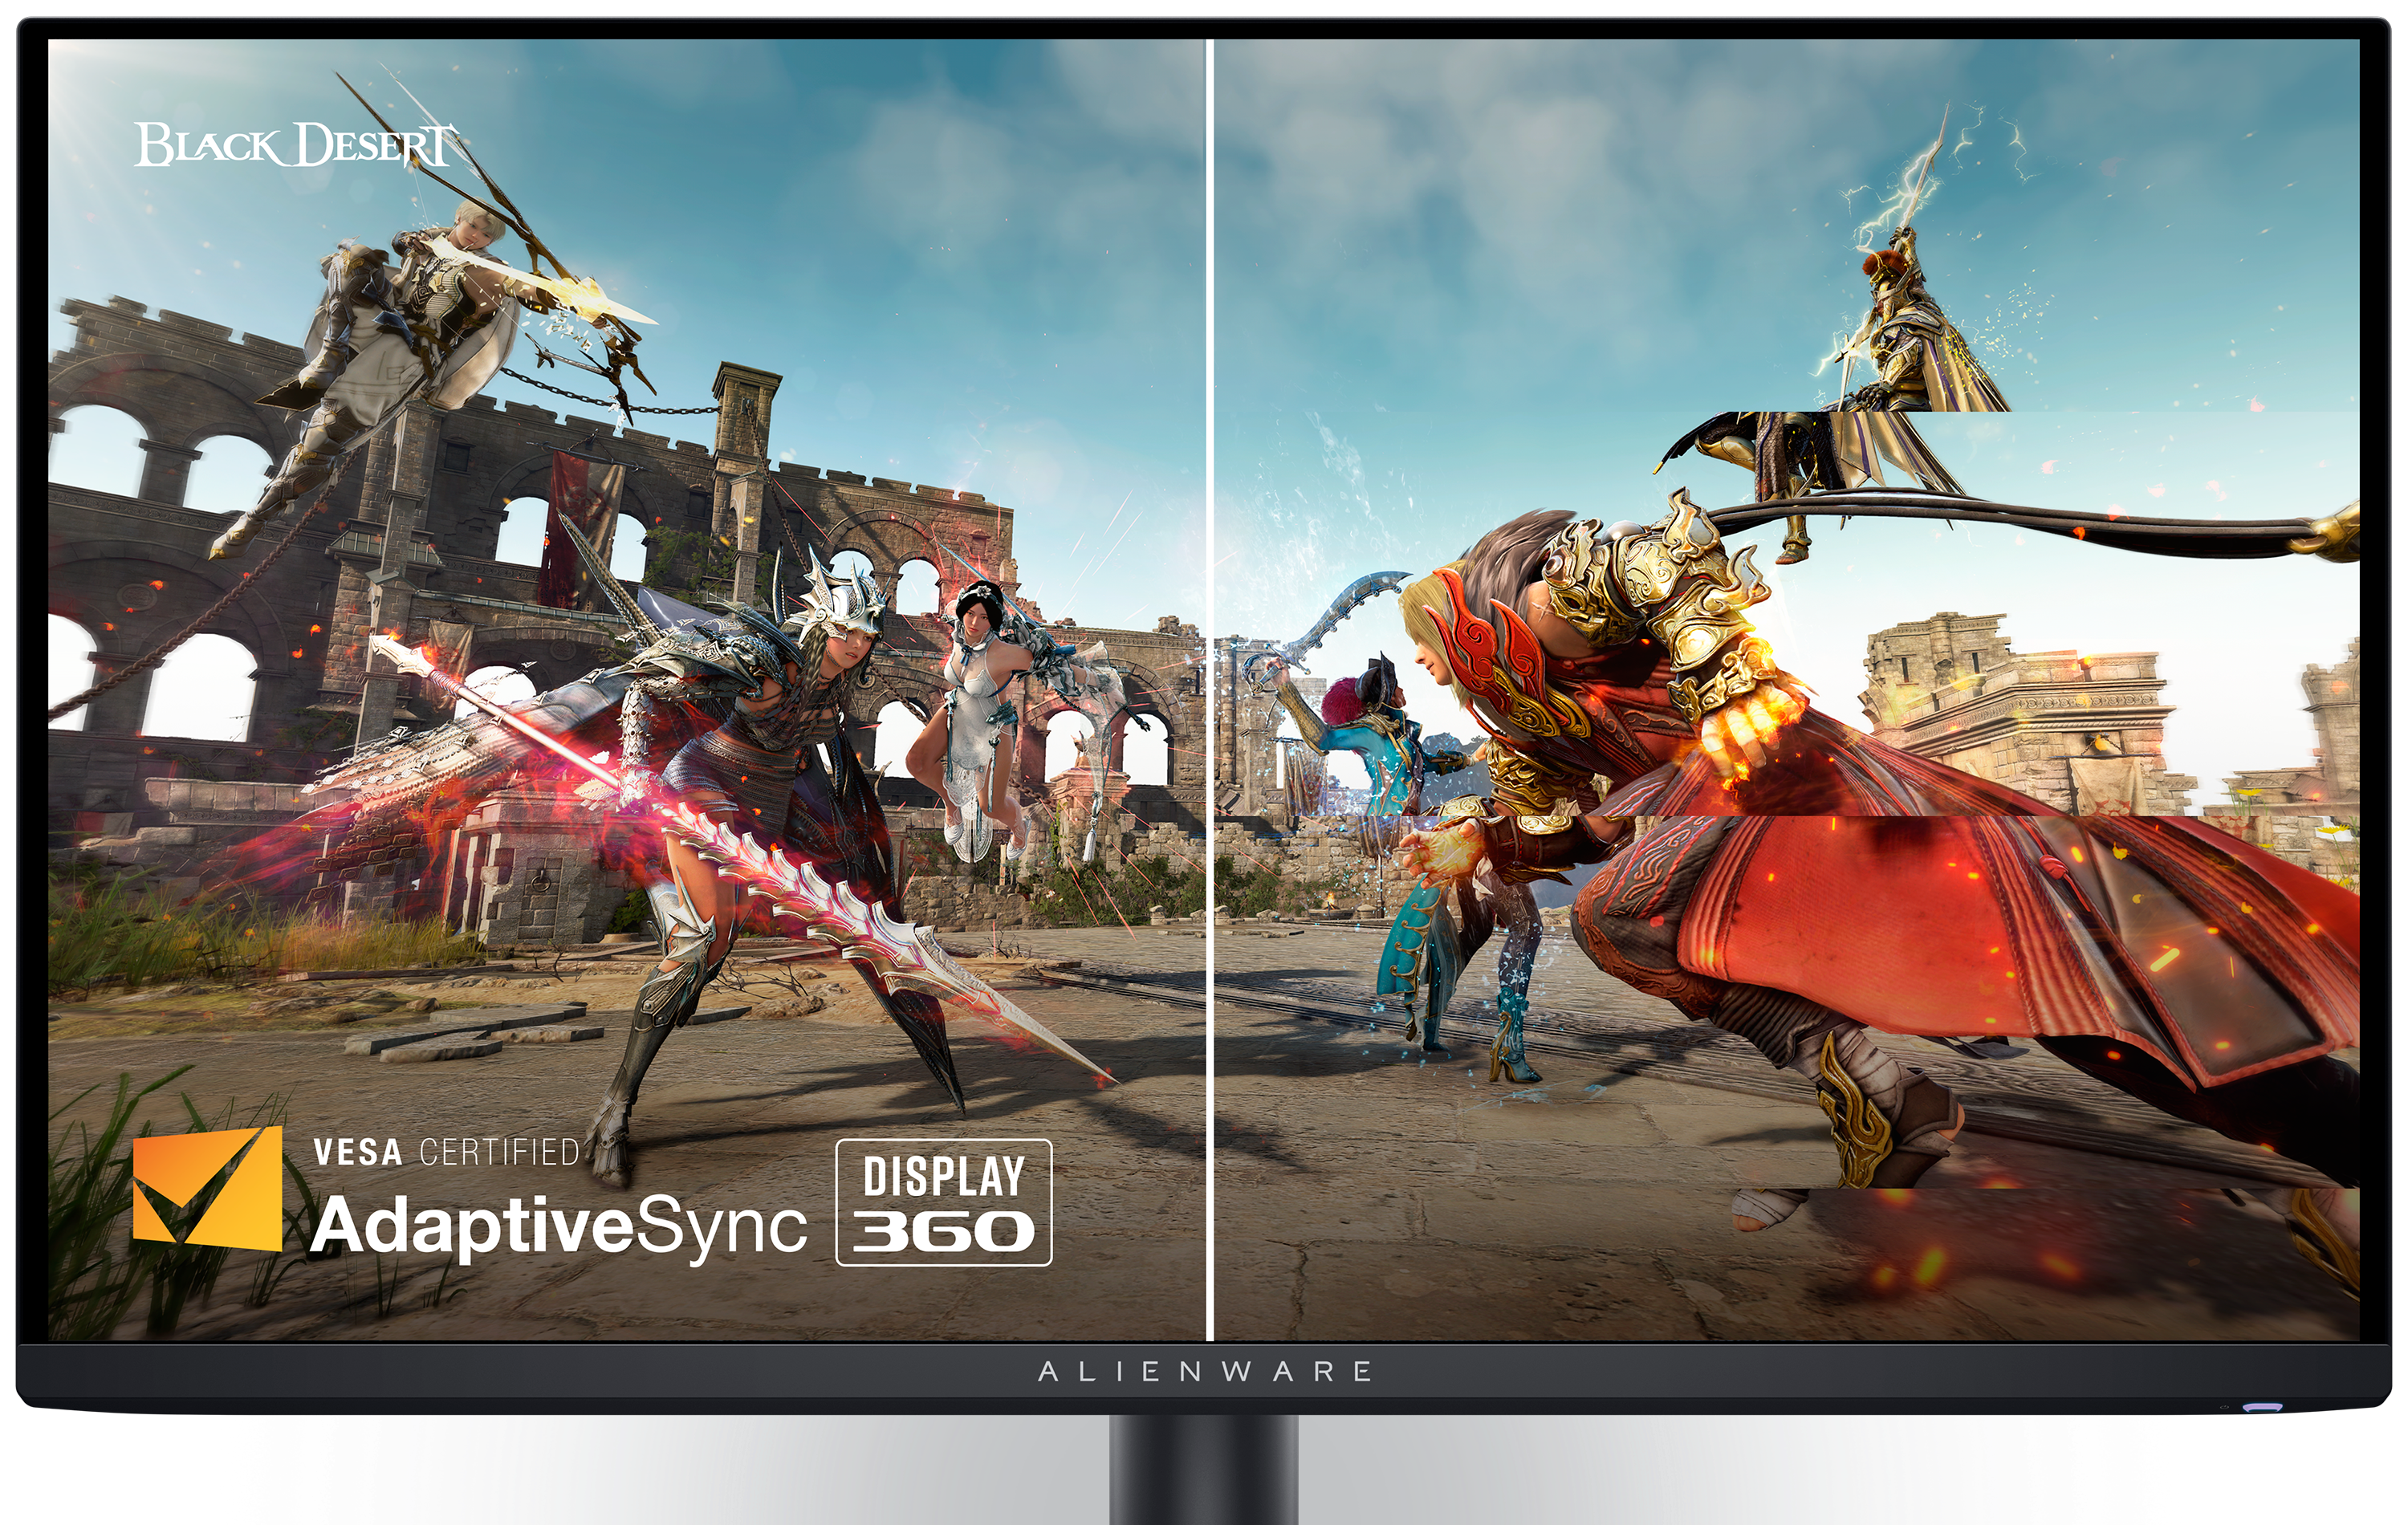 Dell AW2725DF Gaming Monitor with a Black Desert game image and a Vesa Certified AdaptiveSync logo on the screen.